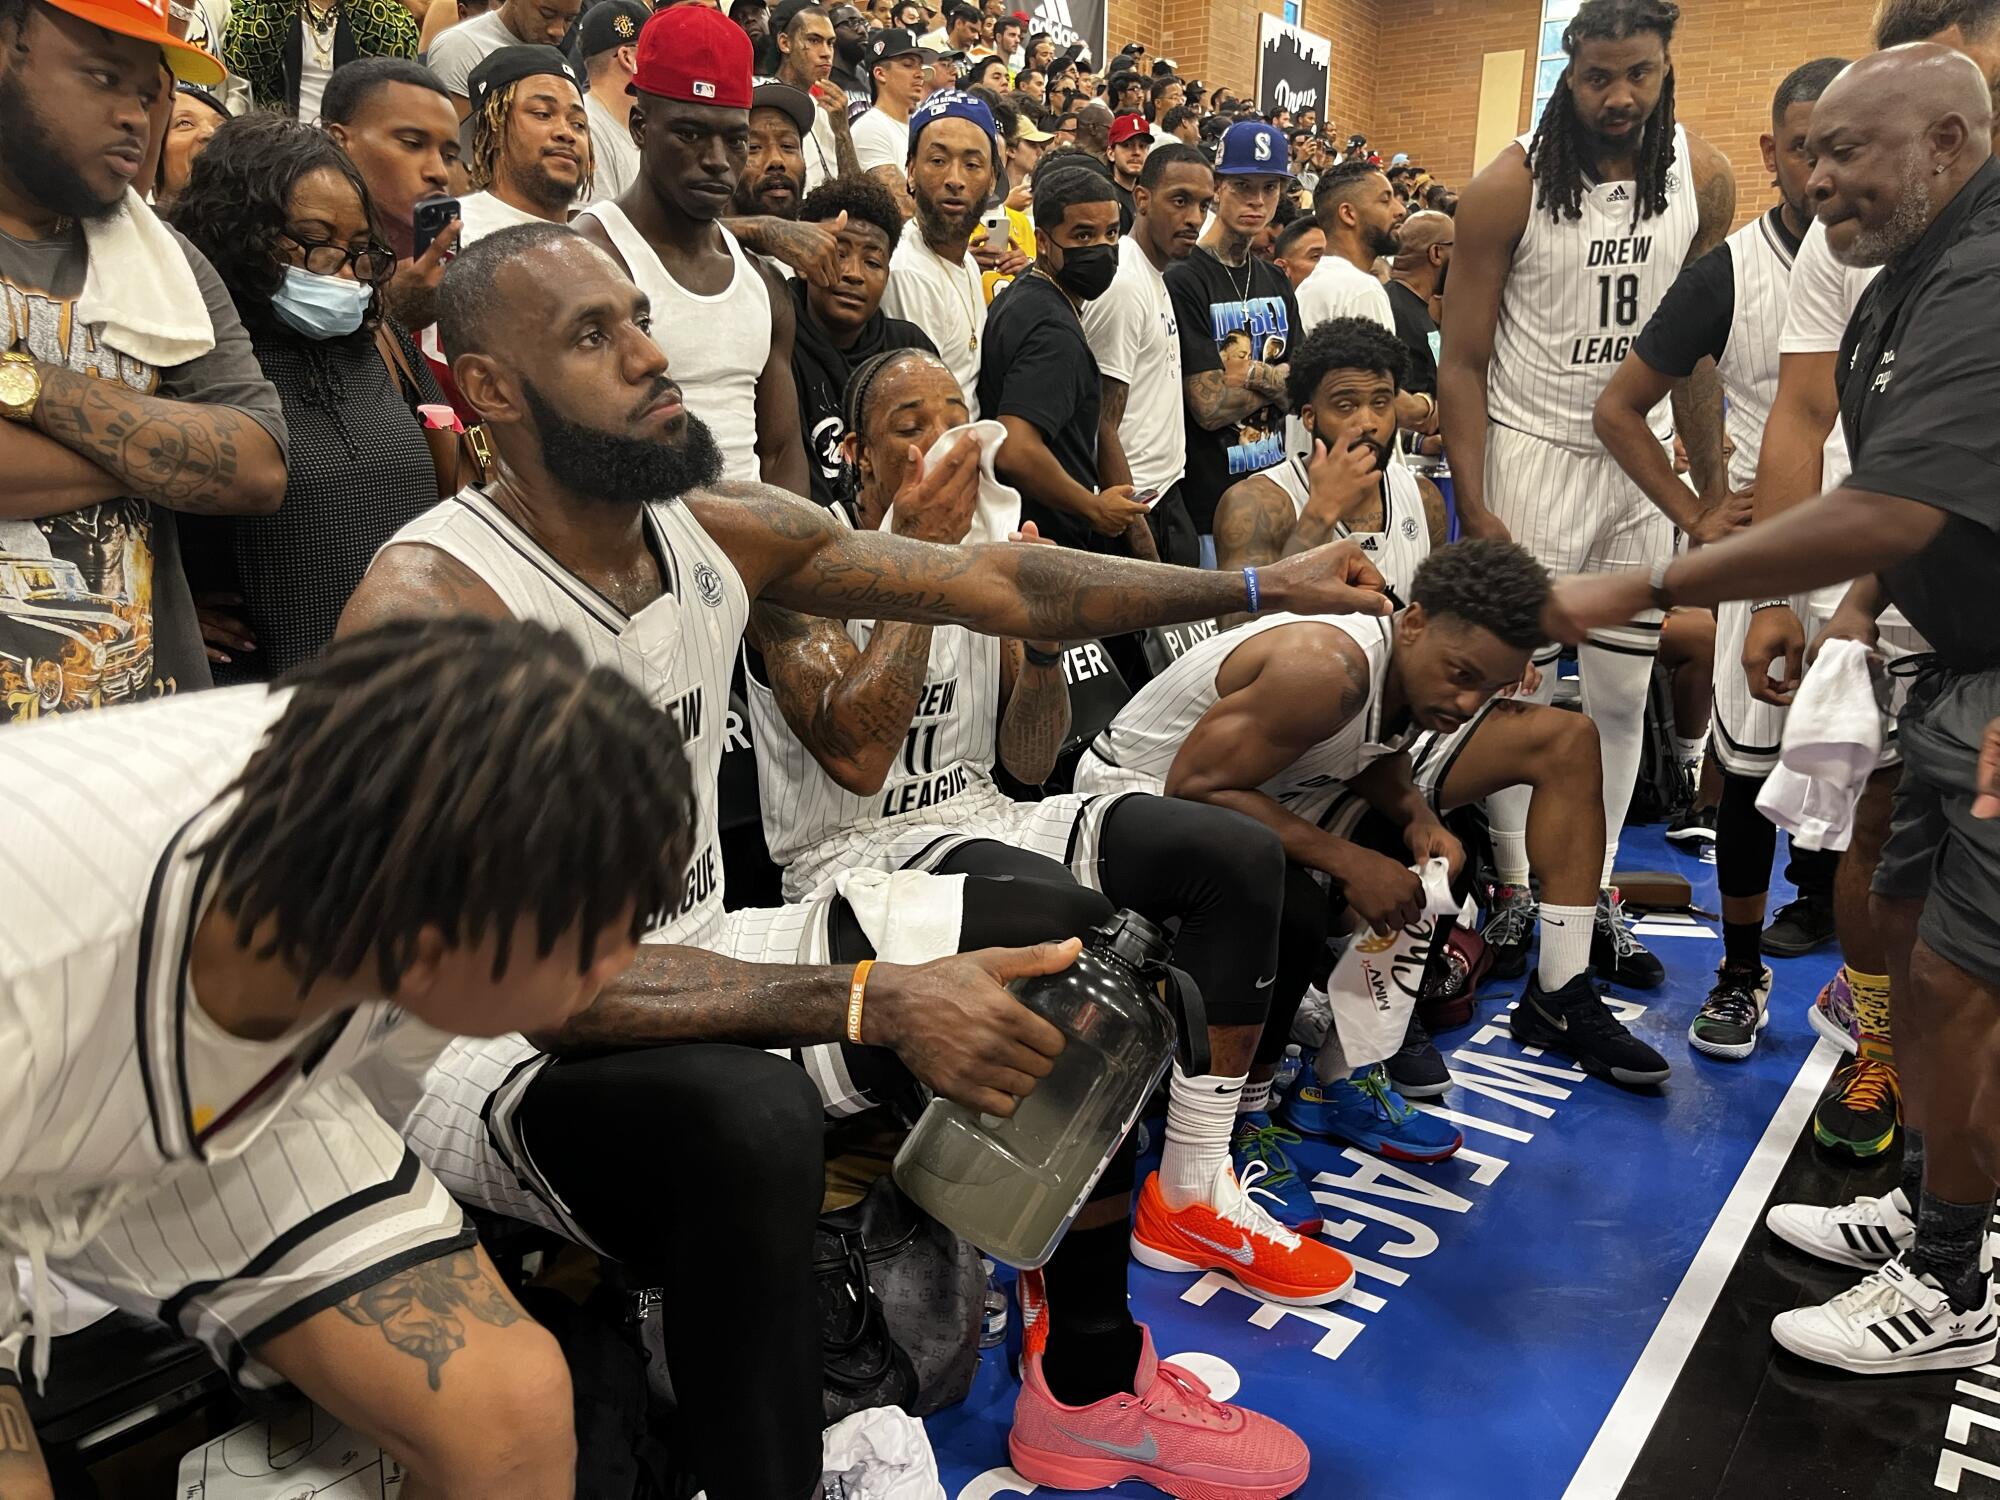 LeBron James on the bench while participating in a Drew League game.